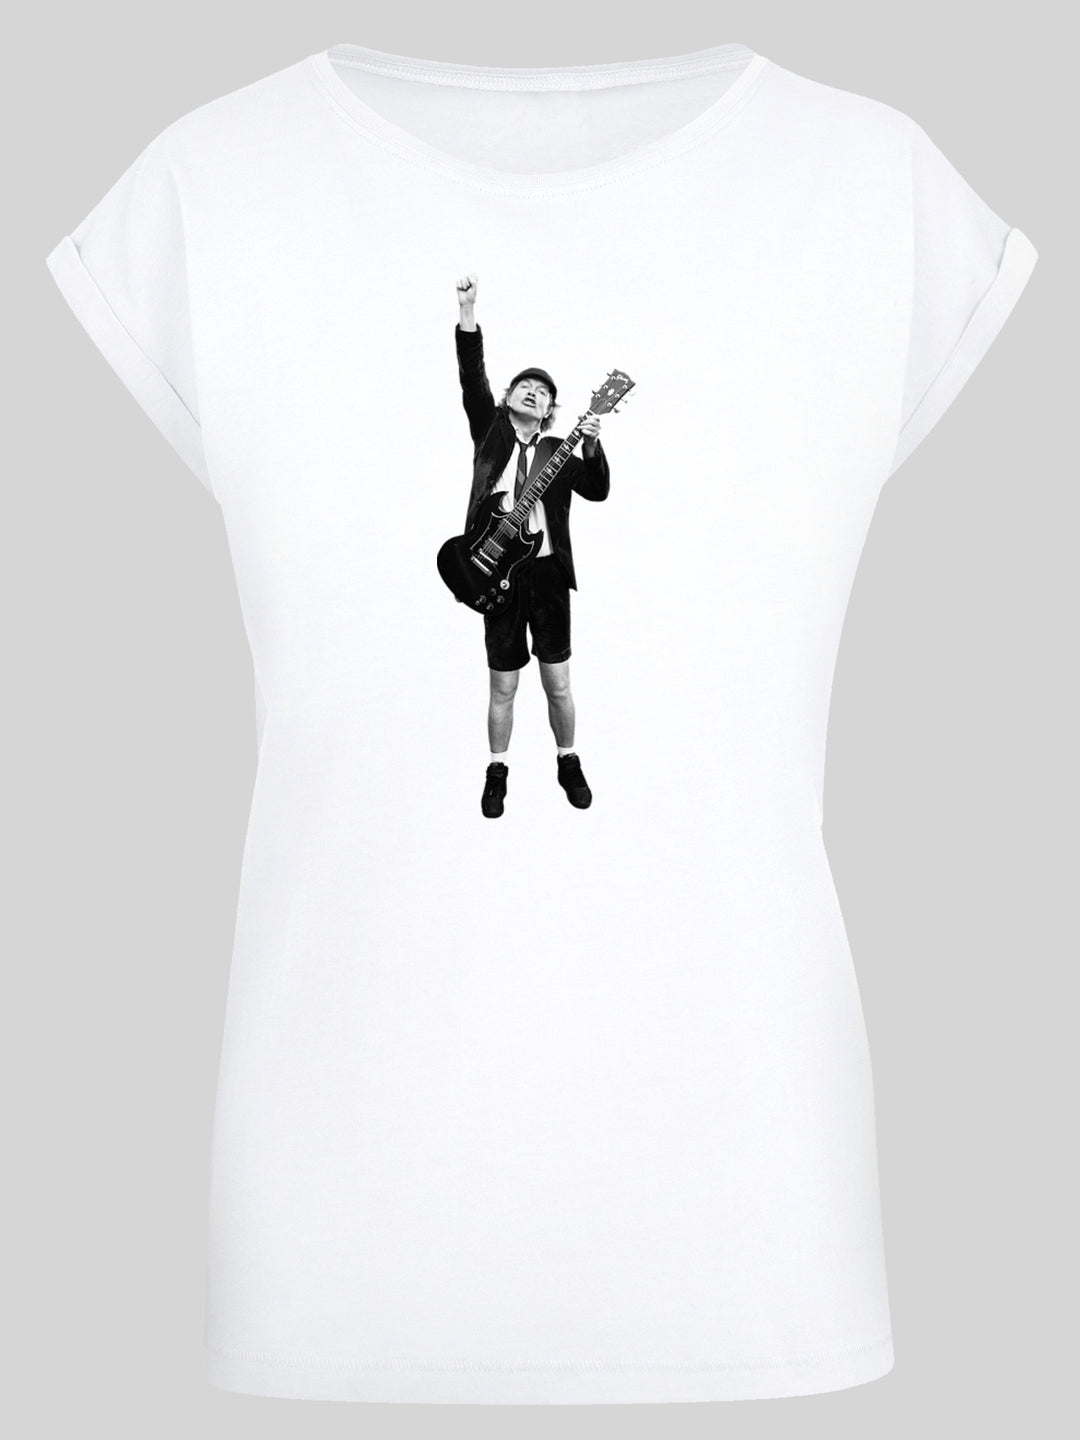 ACDC T-Shirt | Angus Young Cut Out | Premium Short Sleeve Ladies Tee